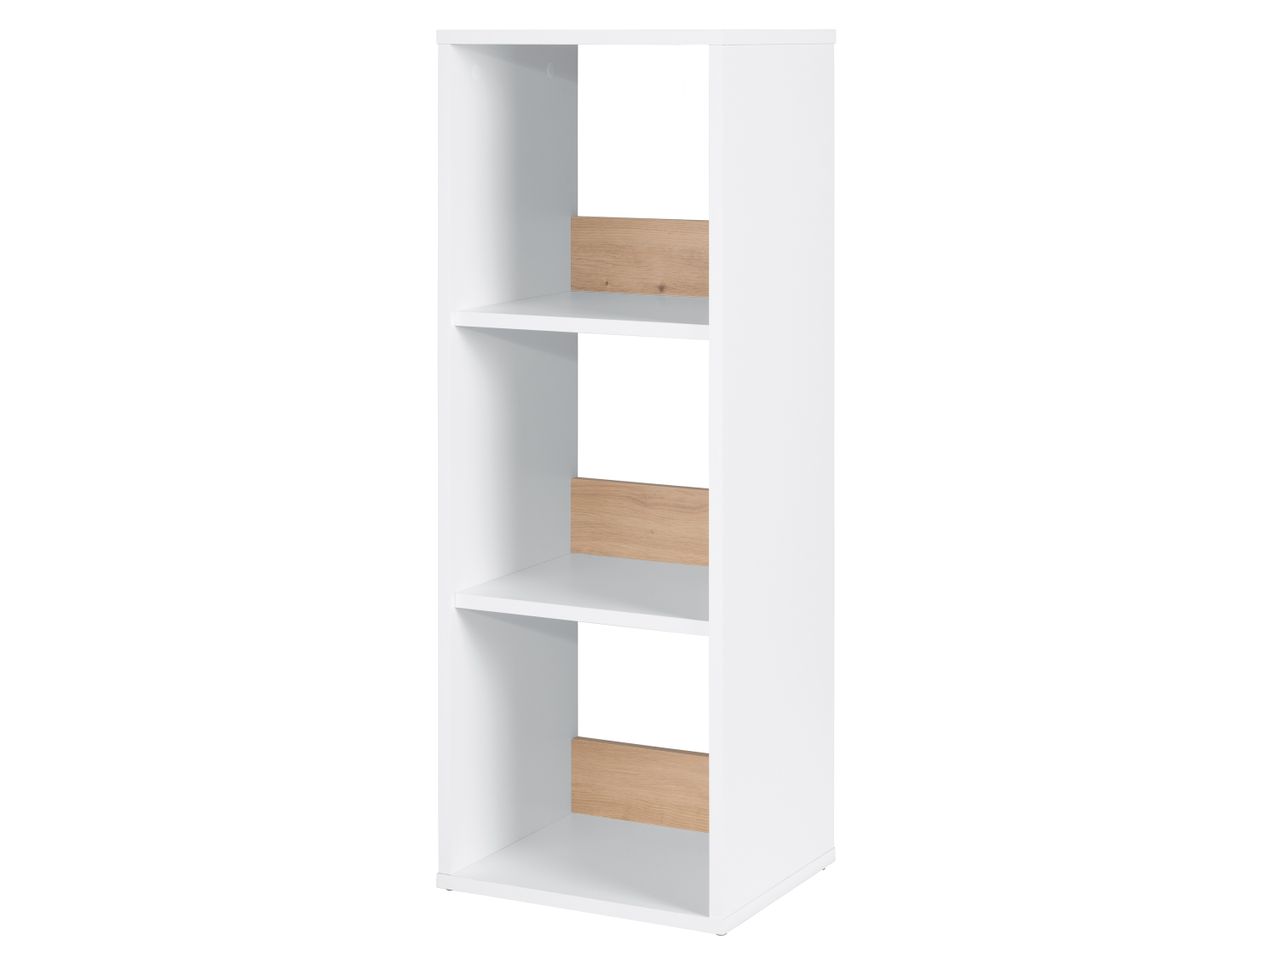 Go to full screen view: Shelving Unit with 3 compartments - Image 1